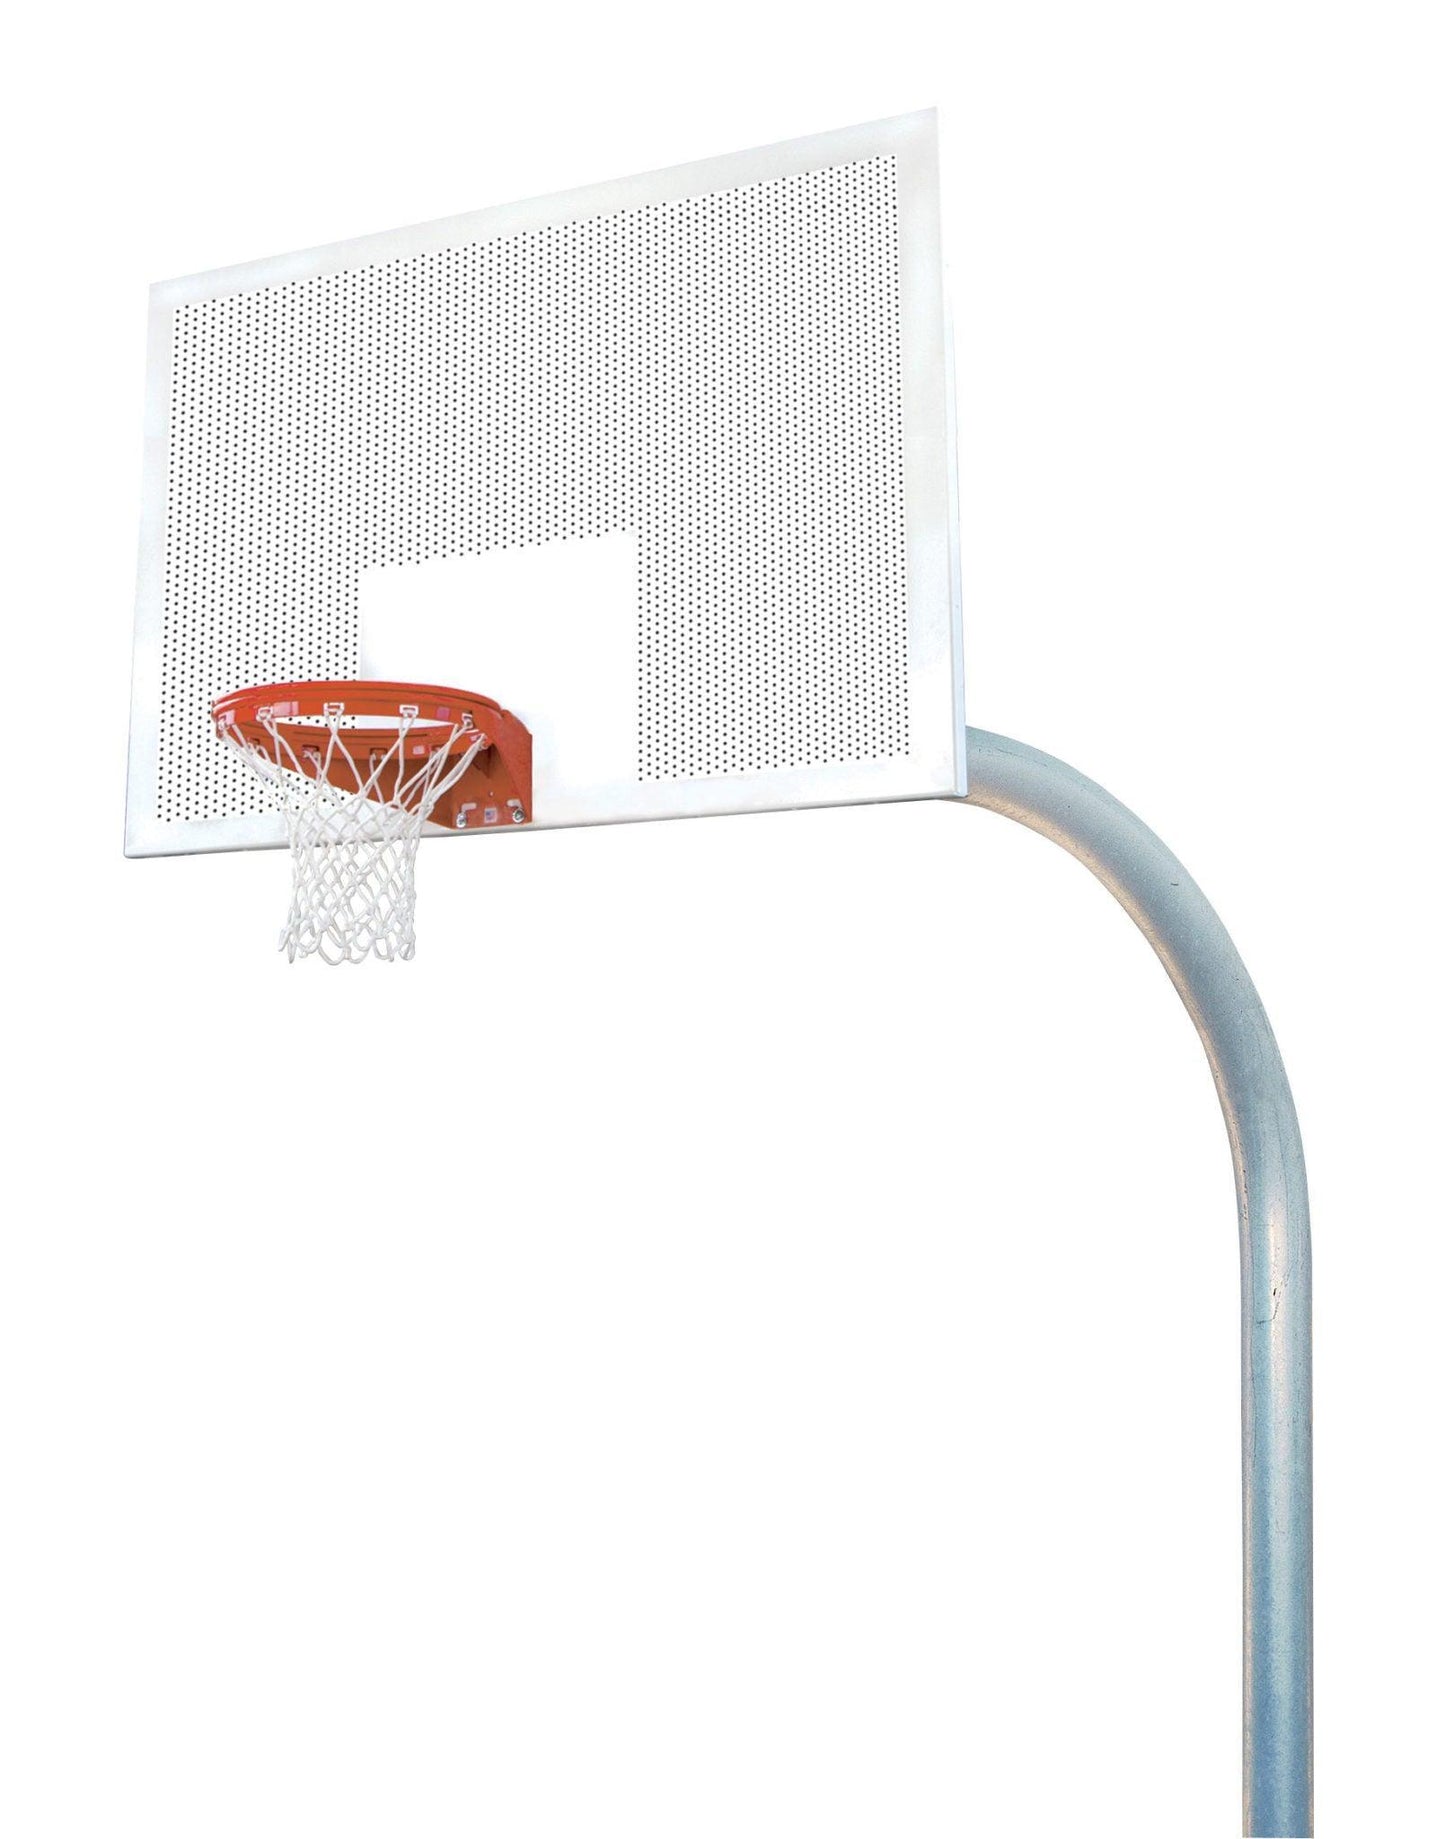 5 9/16" Mega Duty 42"x72" Perforated Steel Playground Basketball System